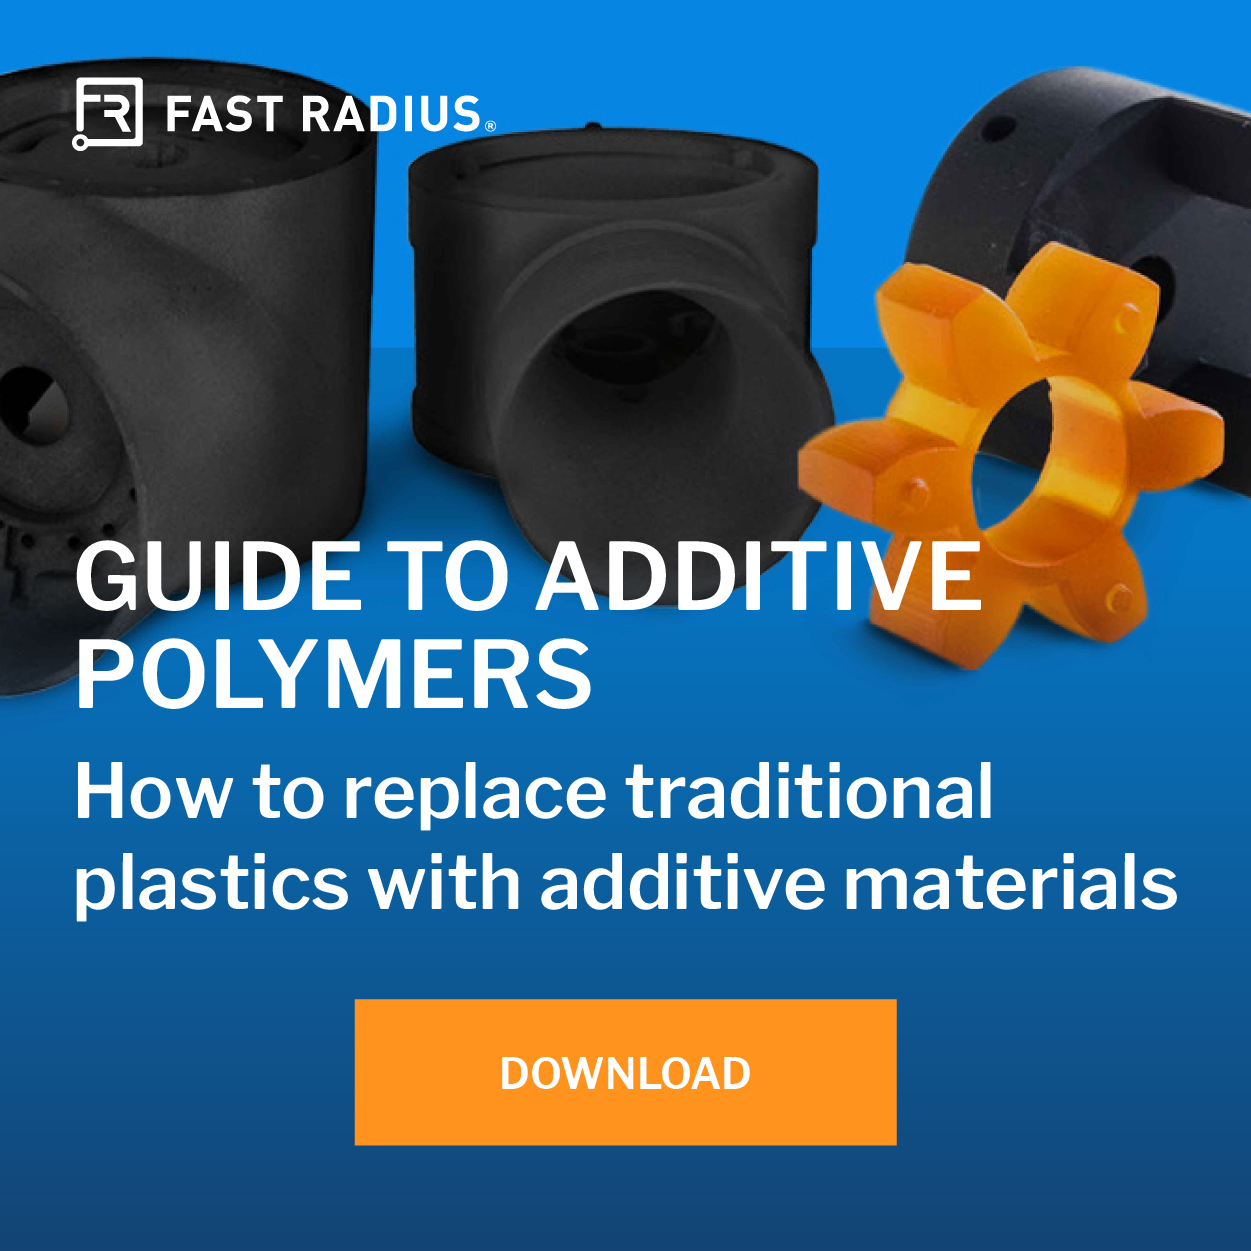 Download the Fast Radius Guide to Additive Polymers